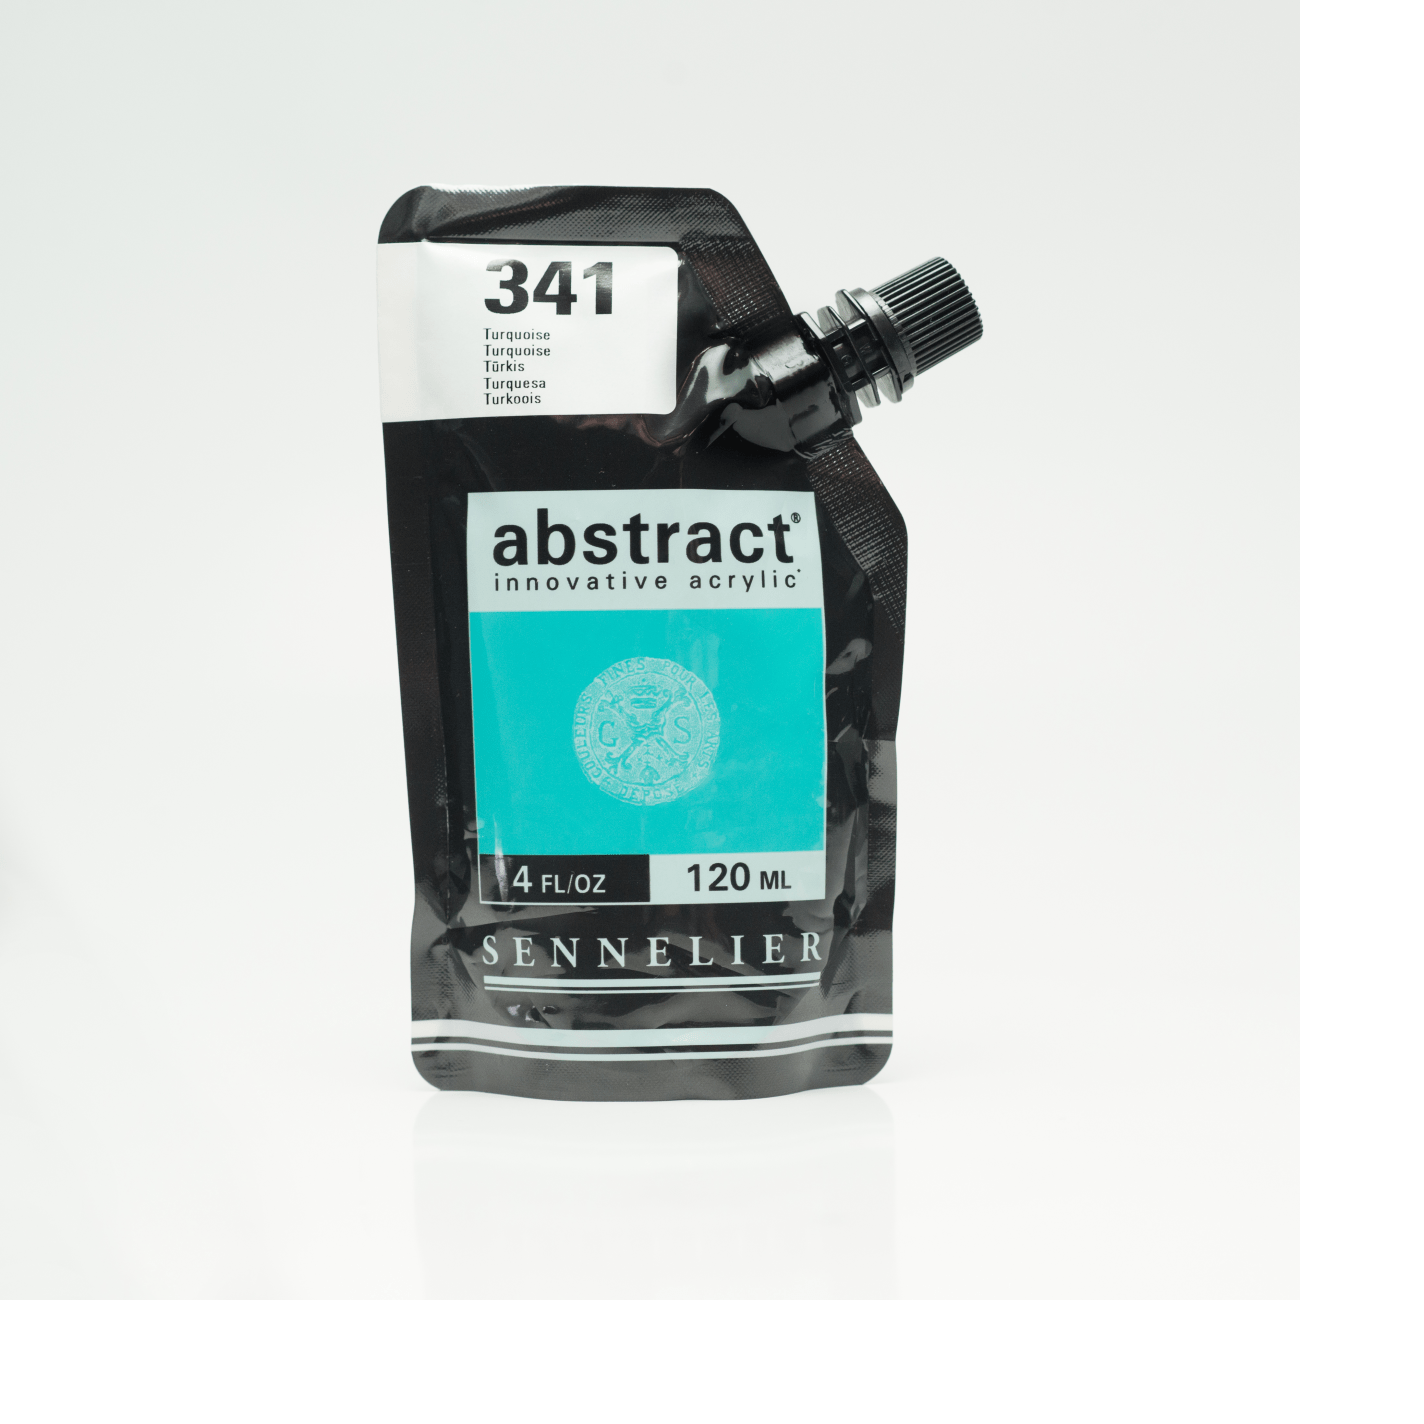 Sennelier Abstract akryl 120ml Turquoise